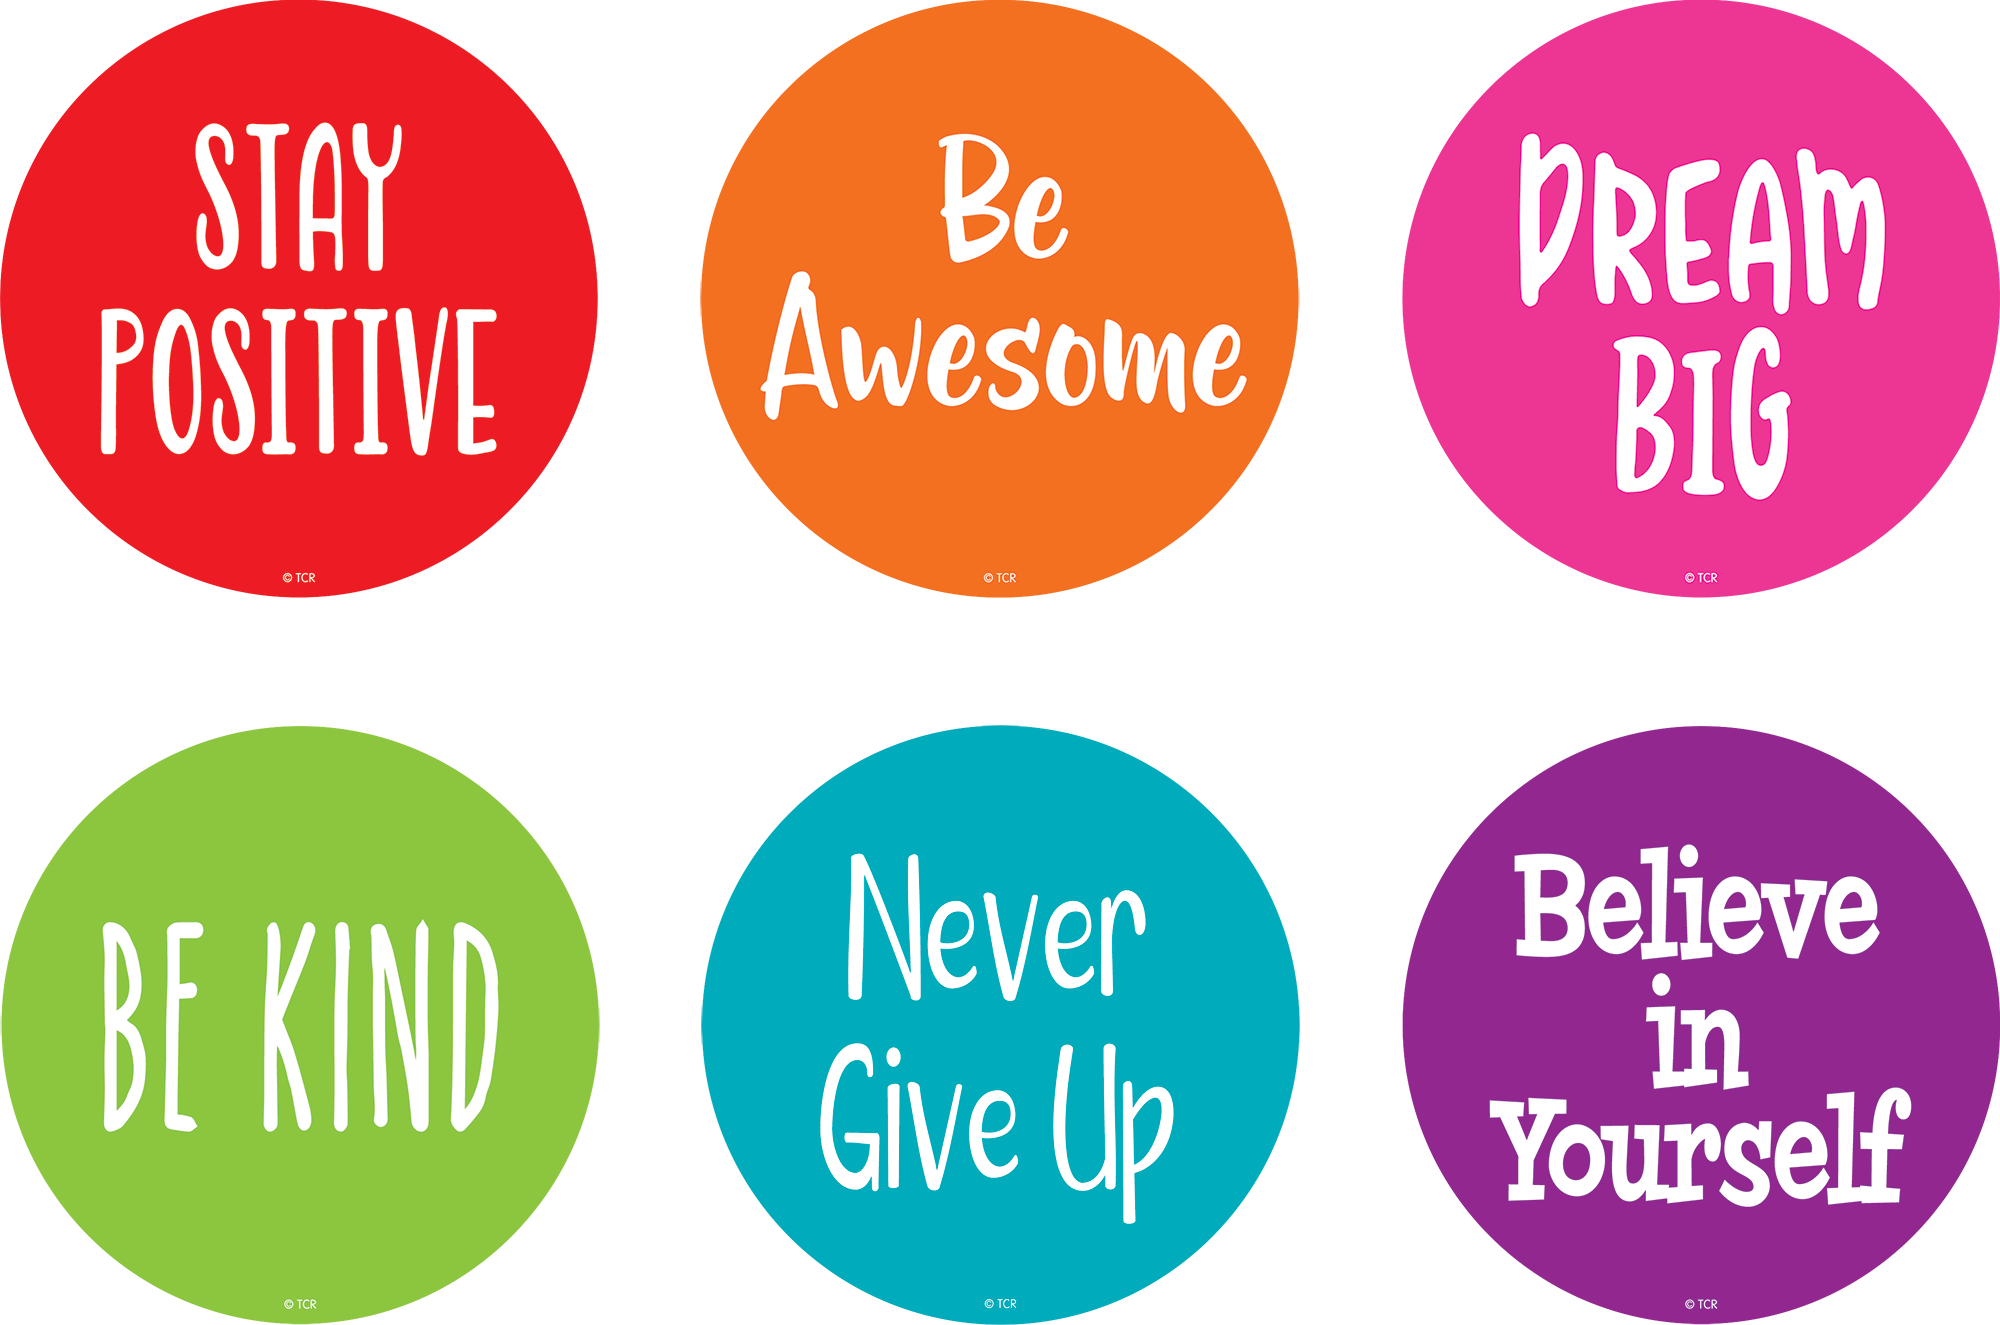 Positive sayings include: Dream Big, Smile, Choose Happy, Never Give Up, Learn Something New, Be Kind, Believe in Yourself, Have Courage, Be Awesome, Do Your Best, Stay Positive, Work Hard